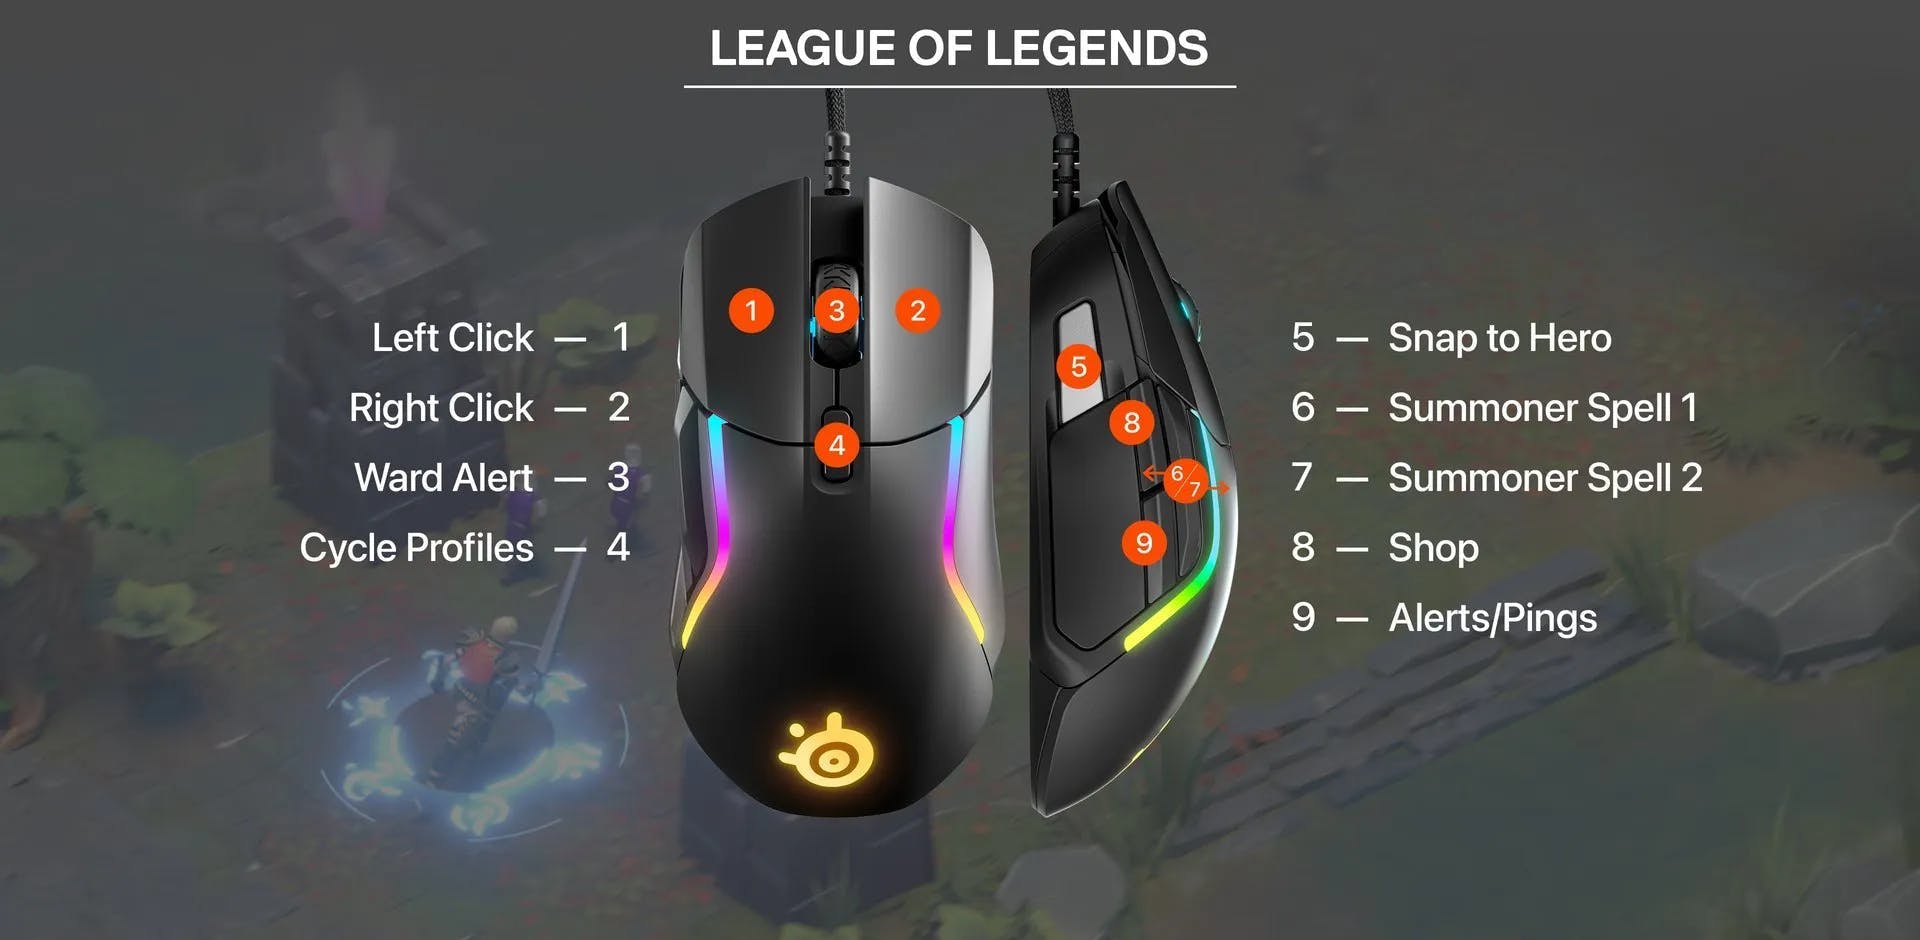 The designated extra buttons on a gaming mouse for League of Legends. | Credit: Steelseries.